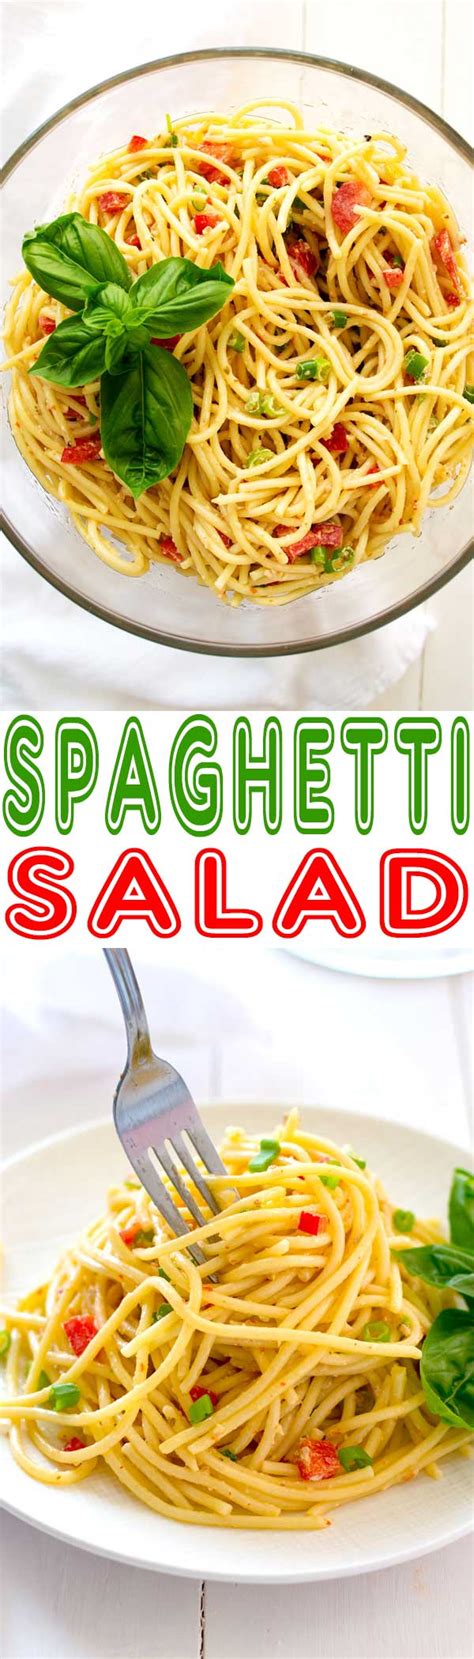 Combine half of the pasta, peppers, cucumbers, tomatoes, and italian dressing in a large bowl. Spaghetti Salad with Italian Dressing - Kitchen Gidget